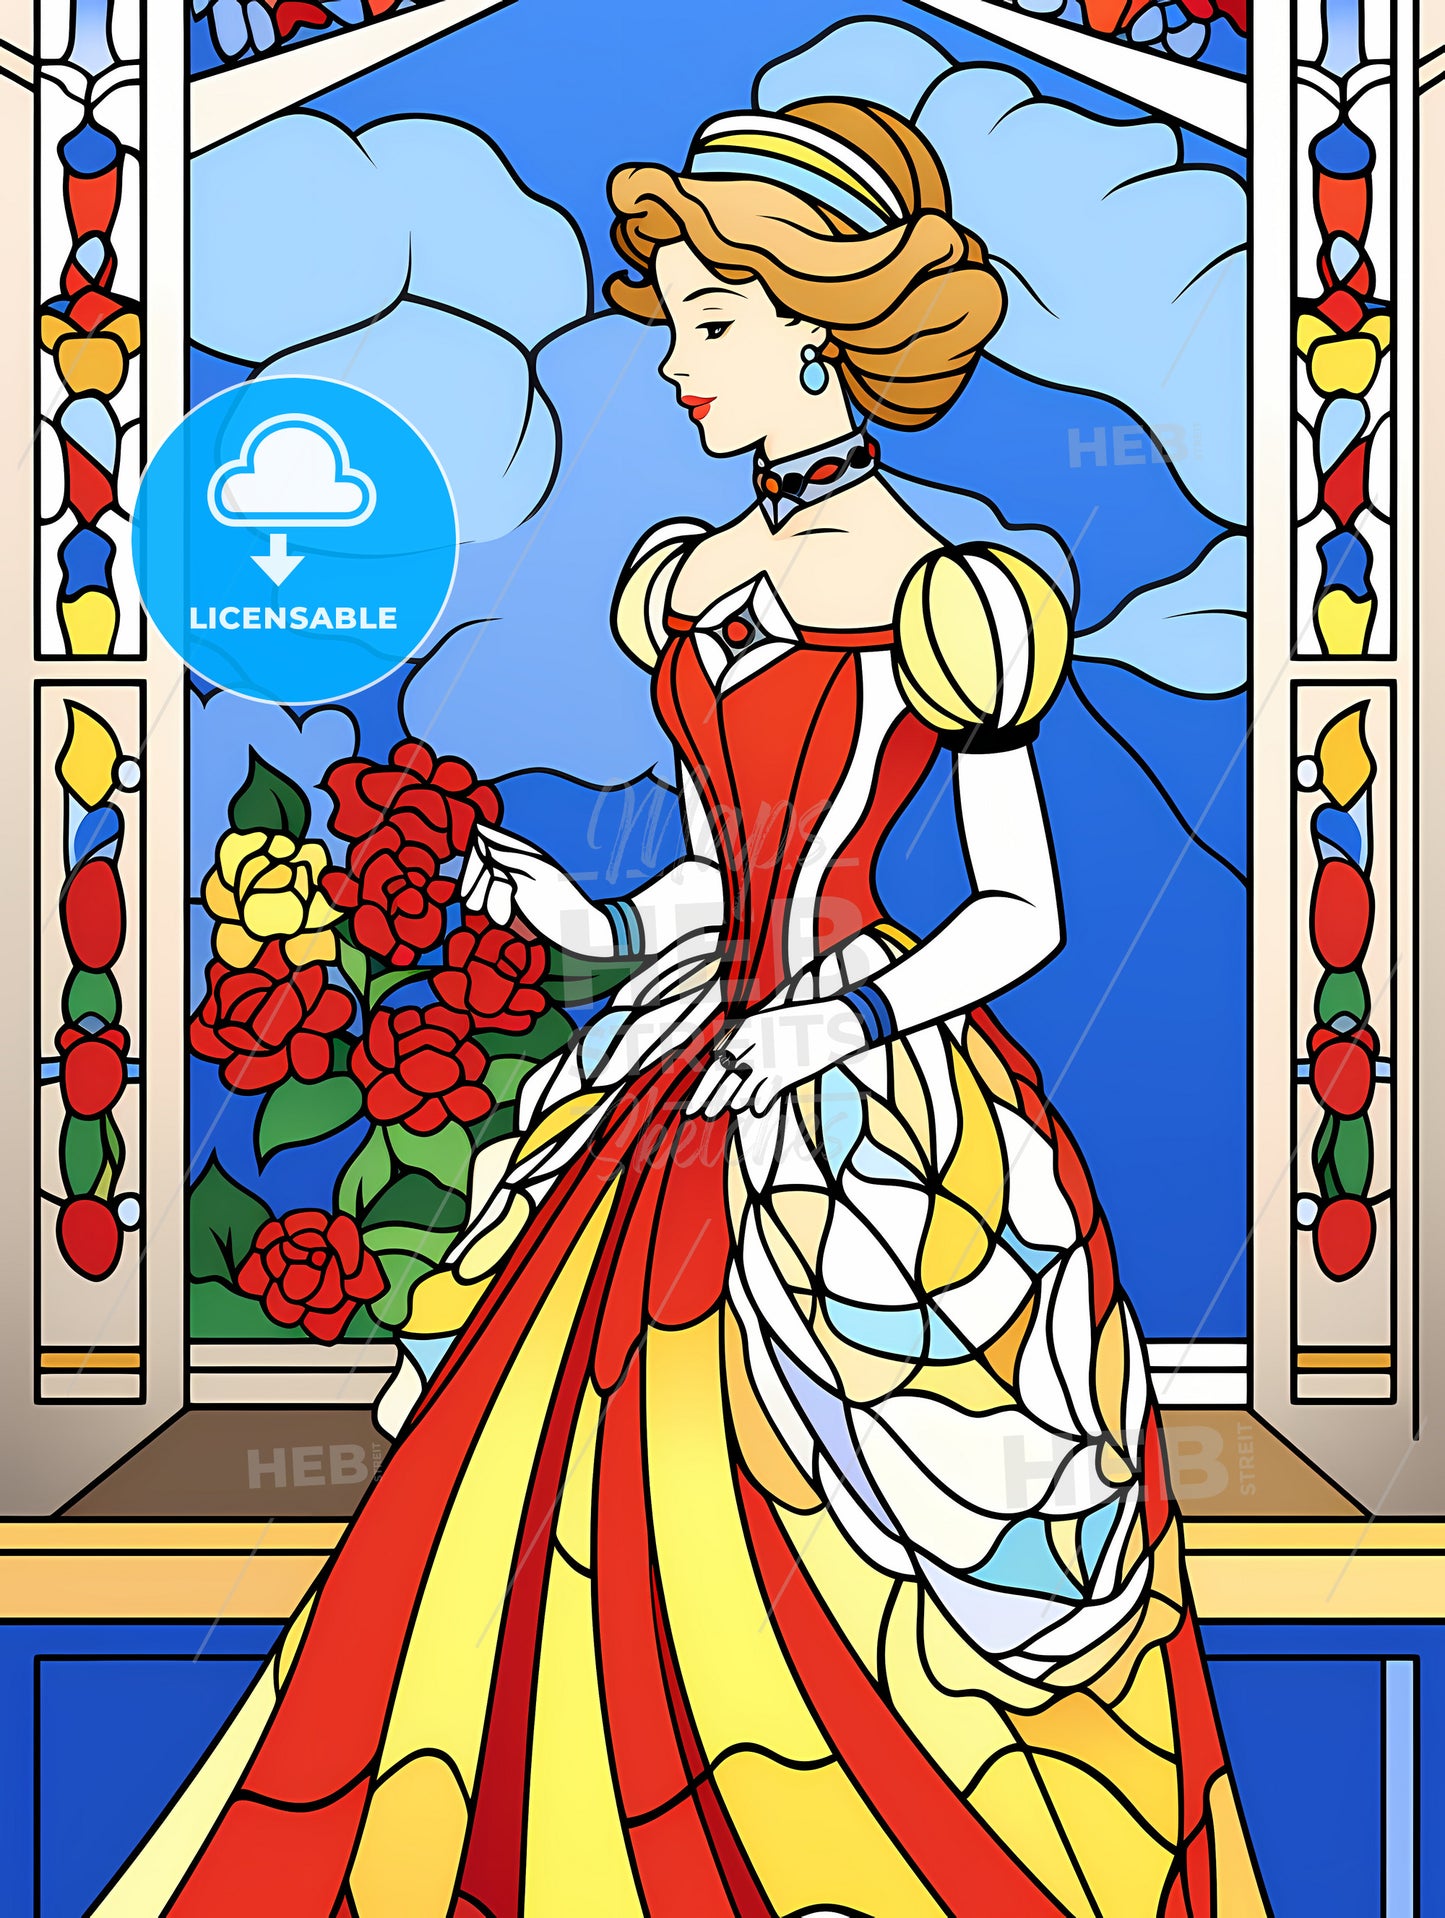 Elegant Victorian Woman, A Cartoon Of A Woman In A Colorful Dress